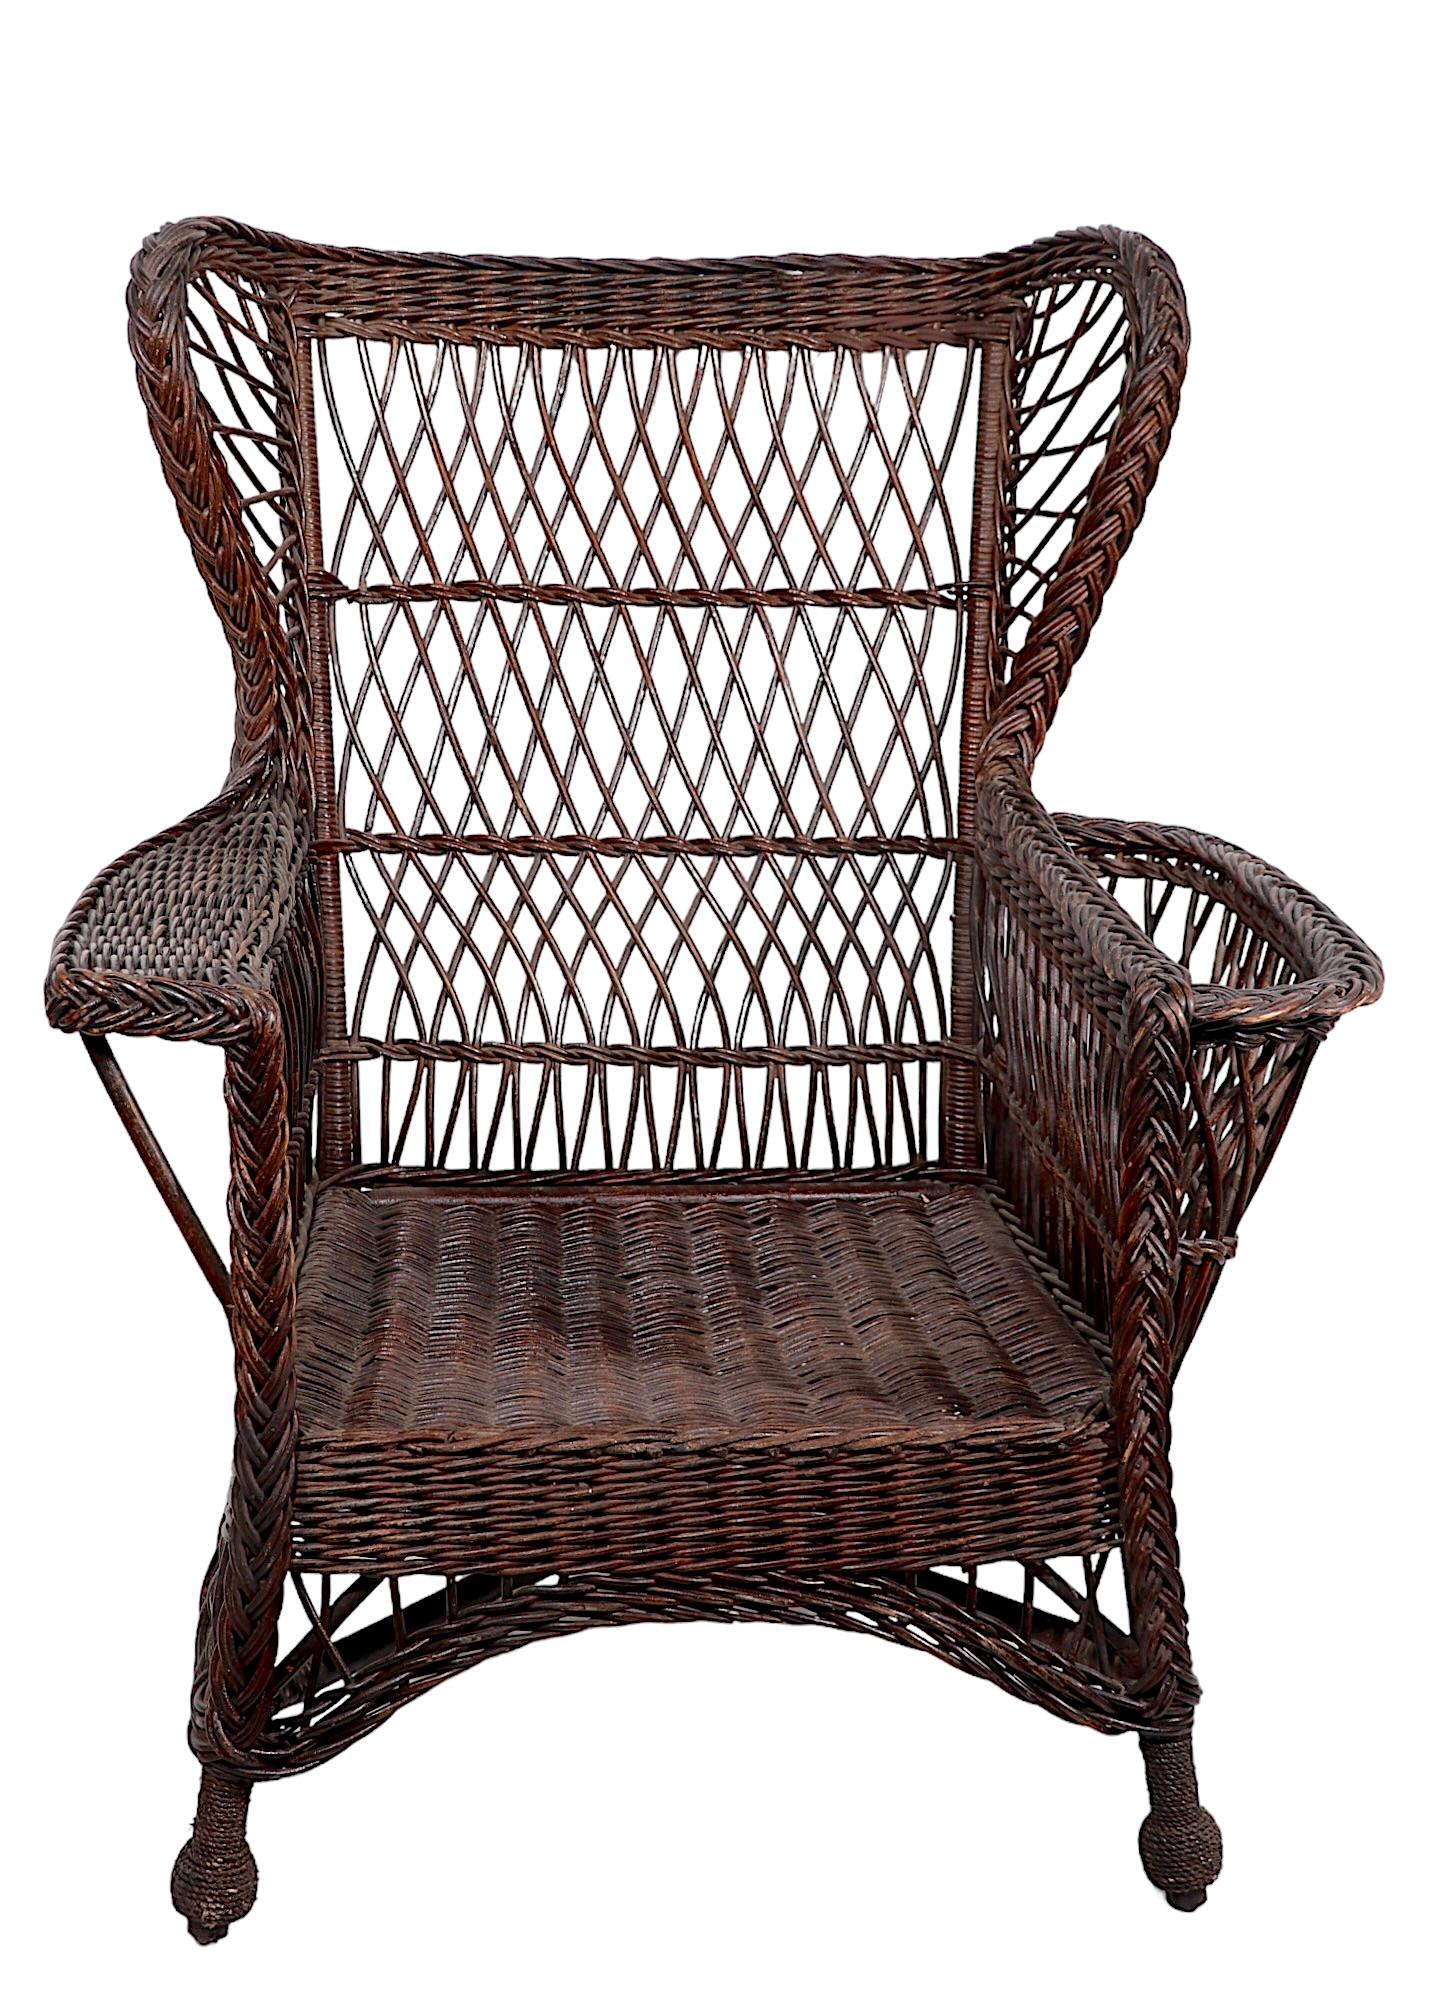 Victorian Bar Harbor Wicker Wing Chair with Magazine Rack Arm For Sale 8